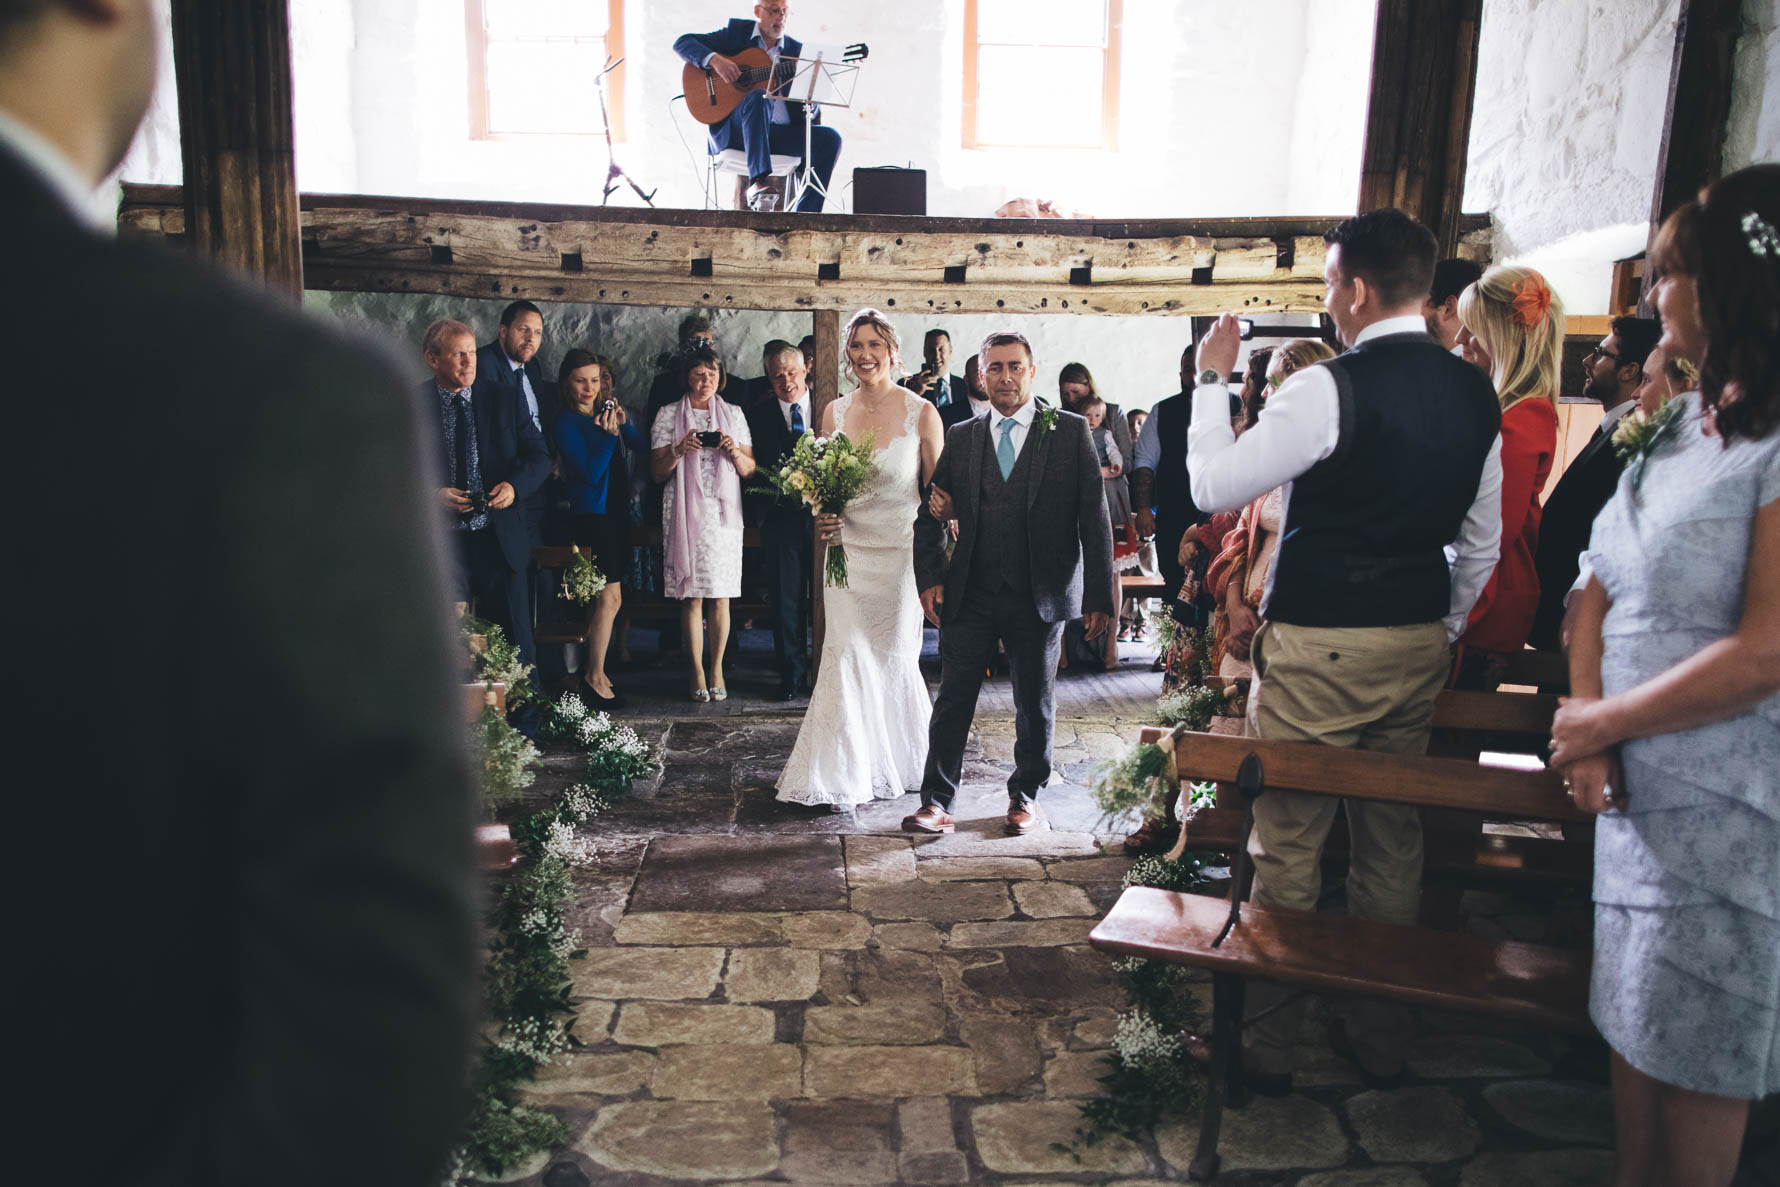 Bride and her father walking down the aisle with a man playing guitar on a platform above the aisle and wedding guests looking towards the bride